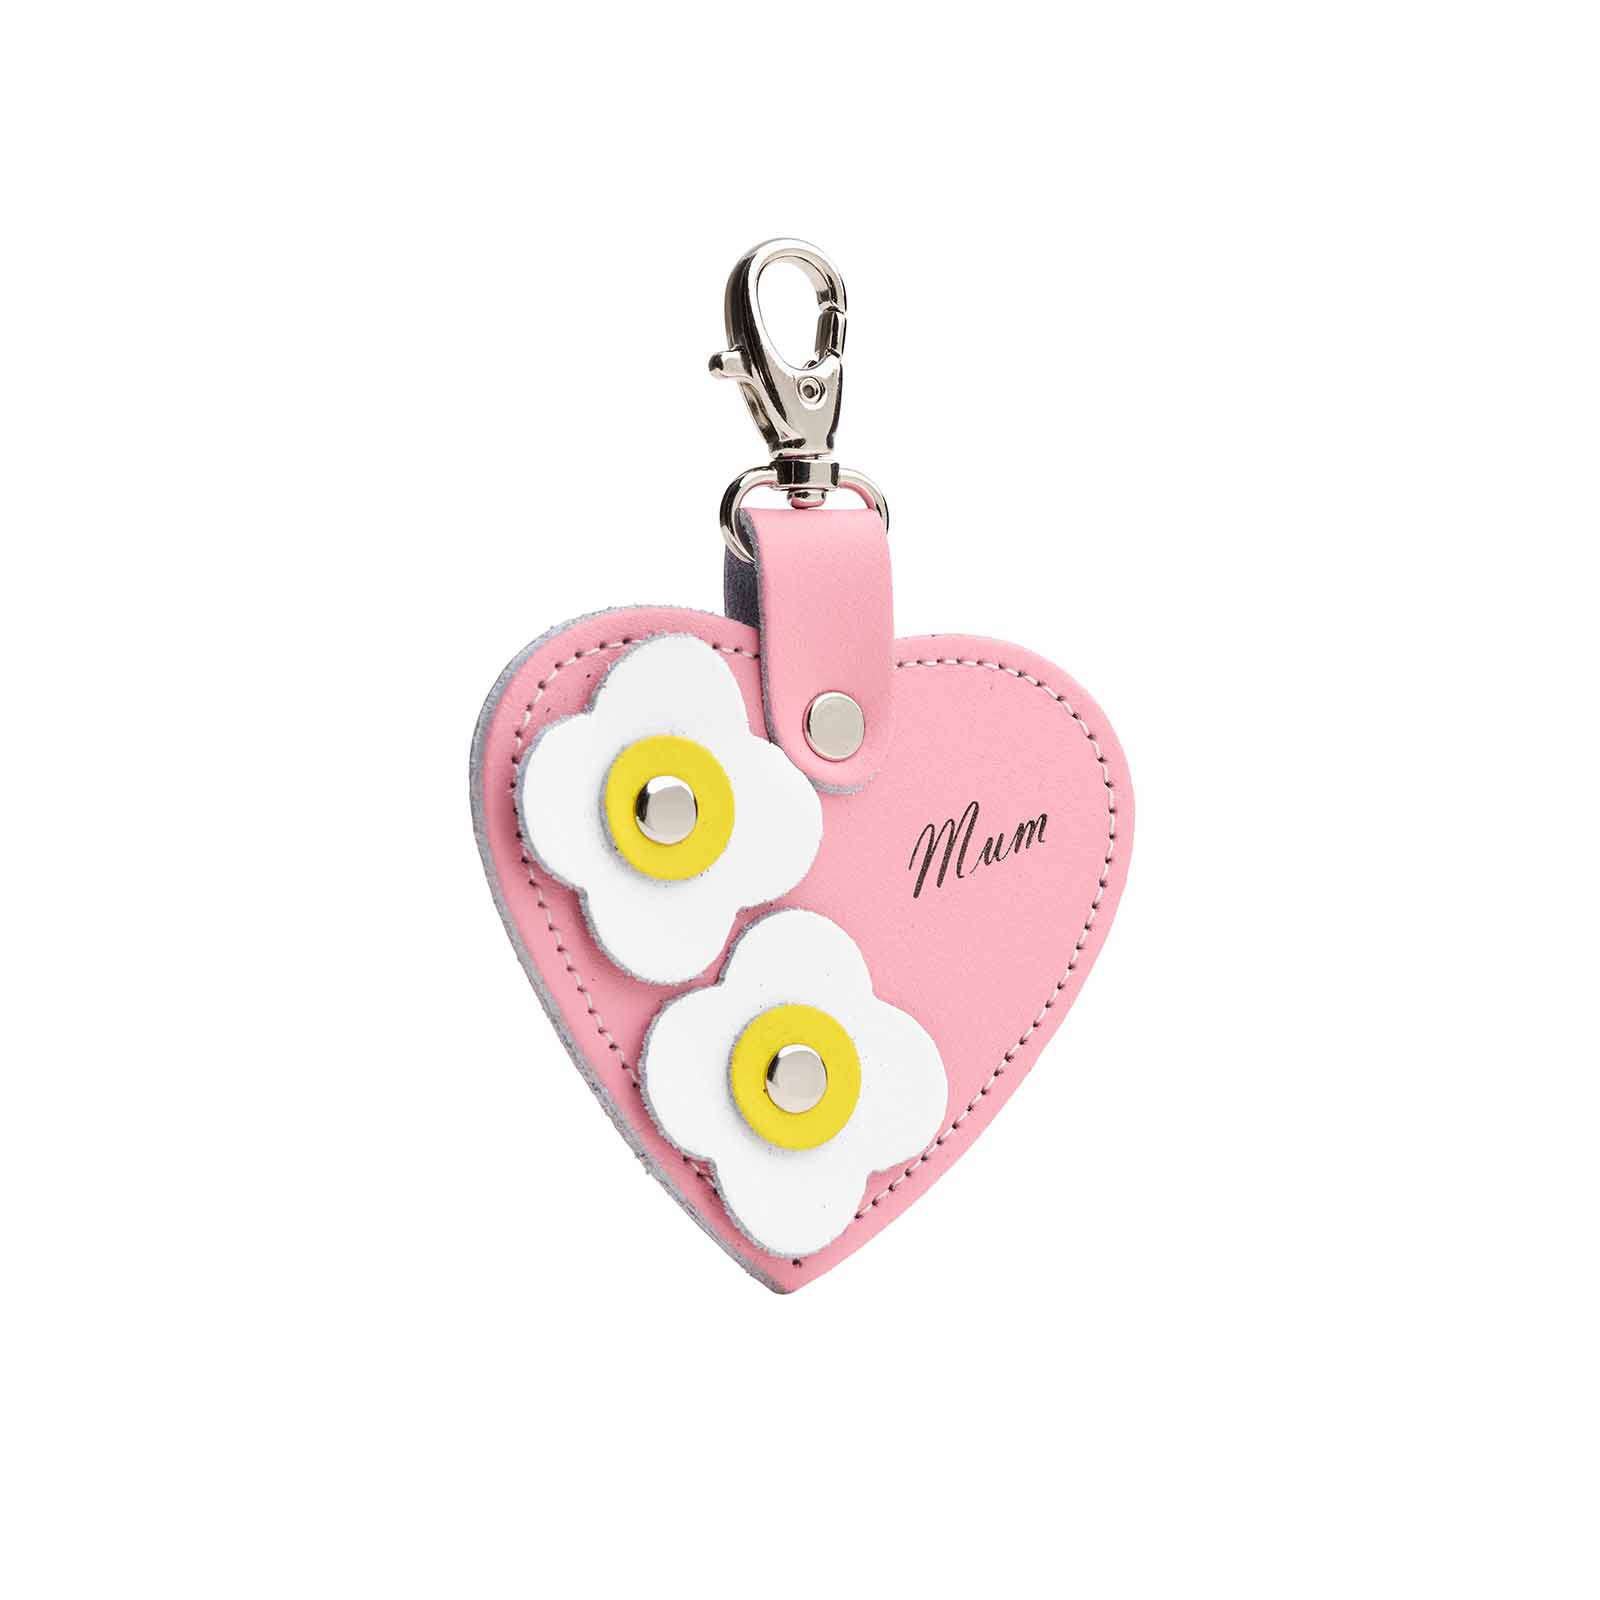 Love heart bag charm - with ’Mum’ engraving and flower appliques - Pastel Pink